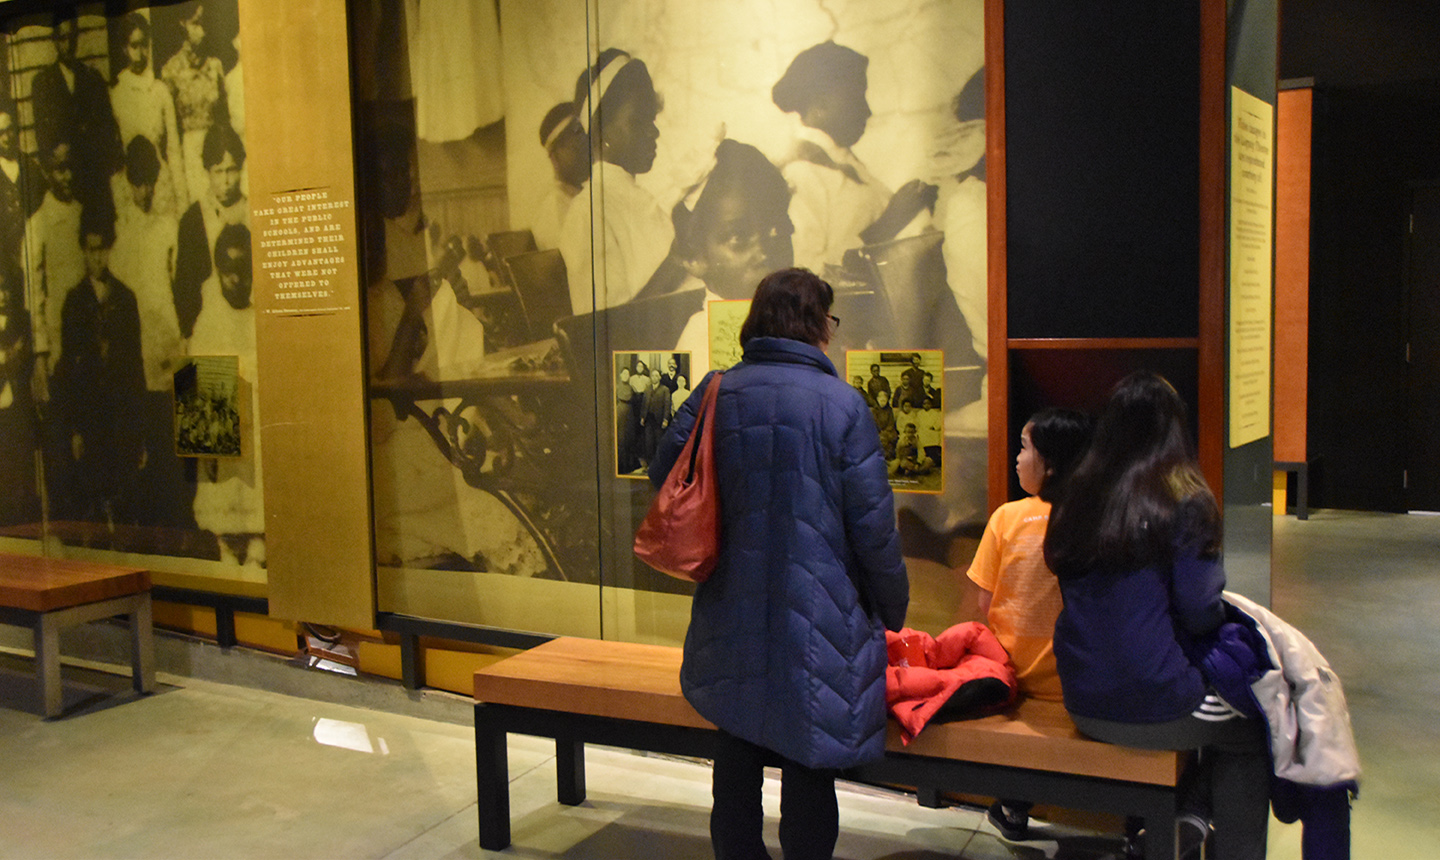 Guests Interacting with the Exhibit